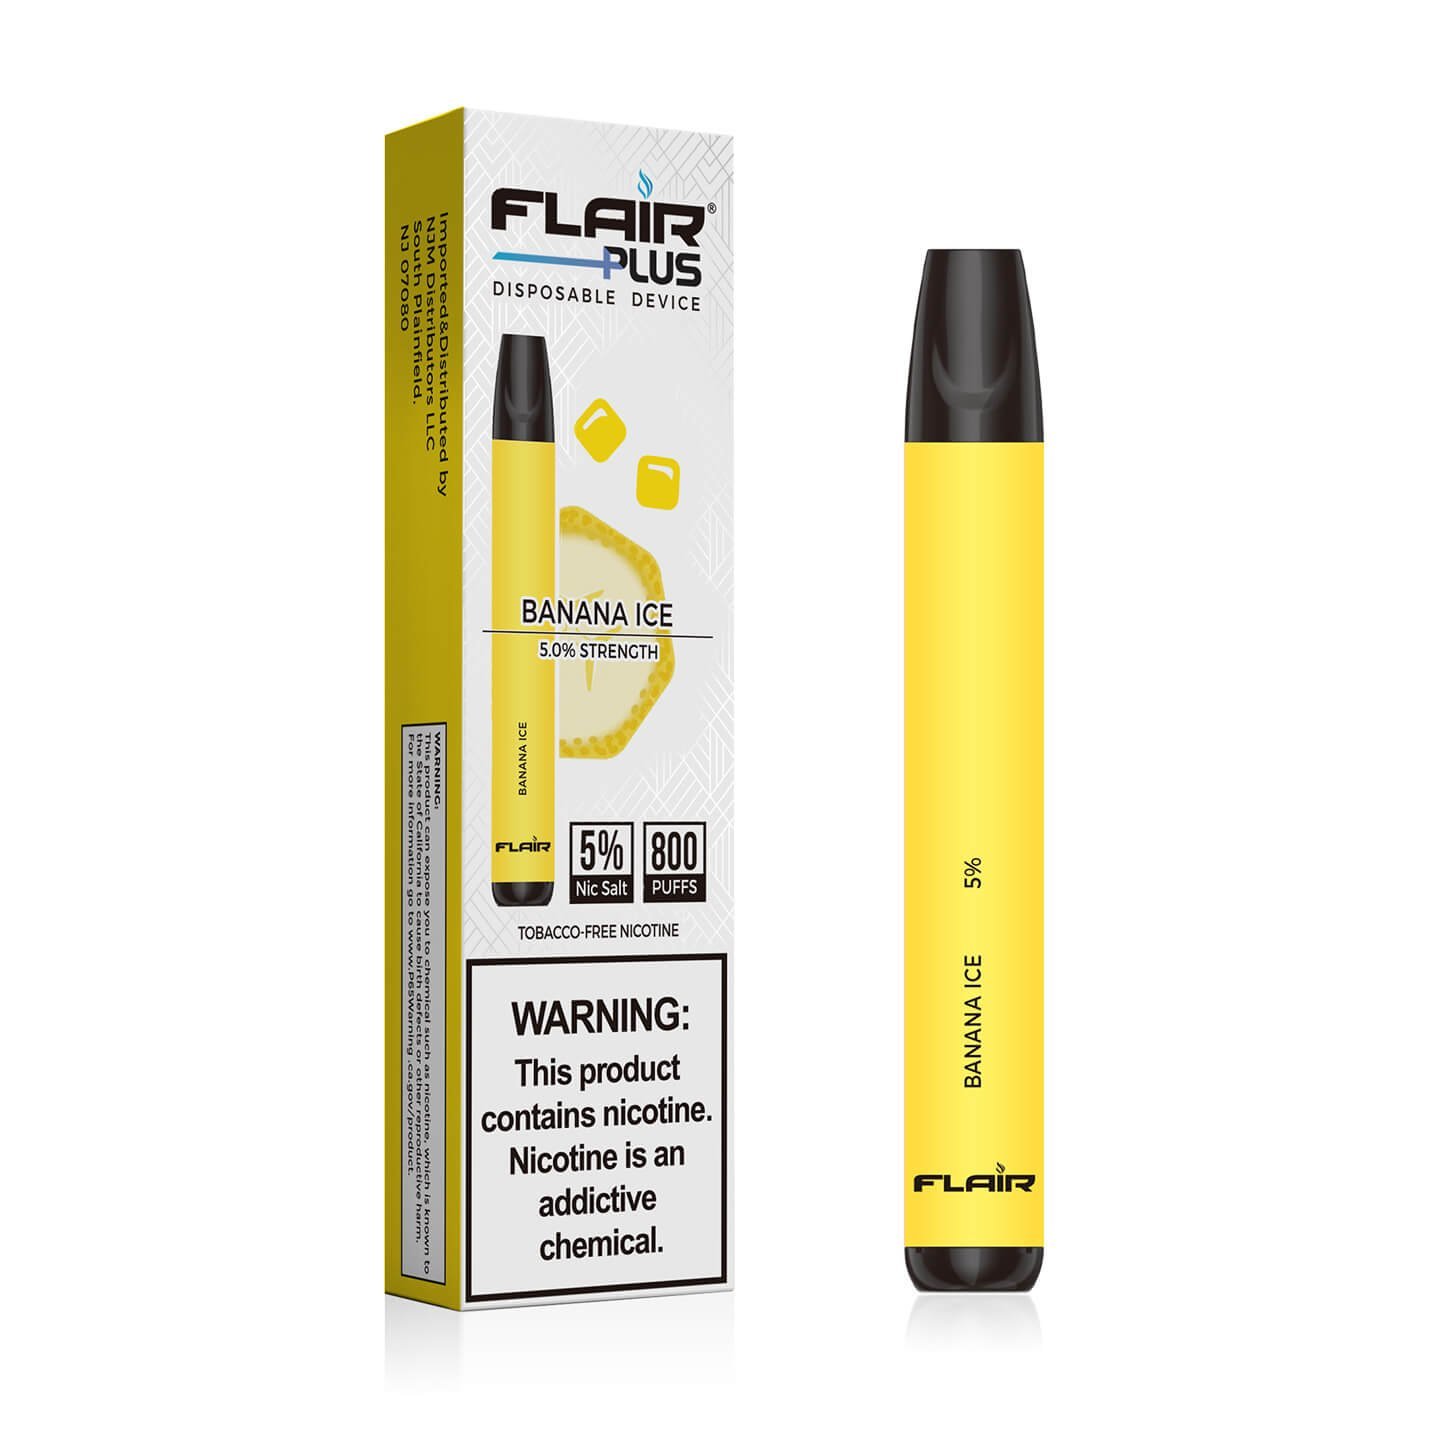 Flair Plus Disposable Devices (Banana Ice - 800 Puffs)